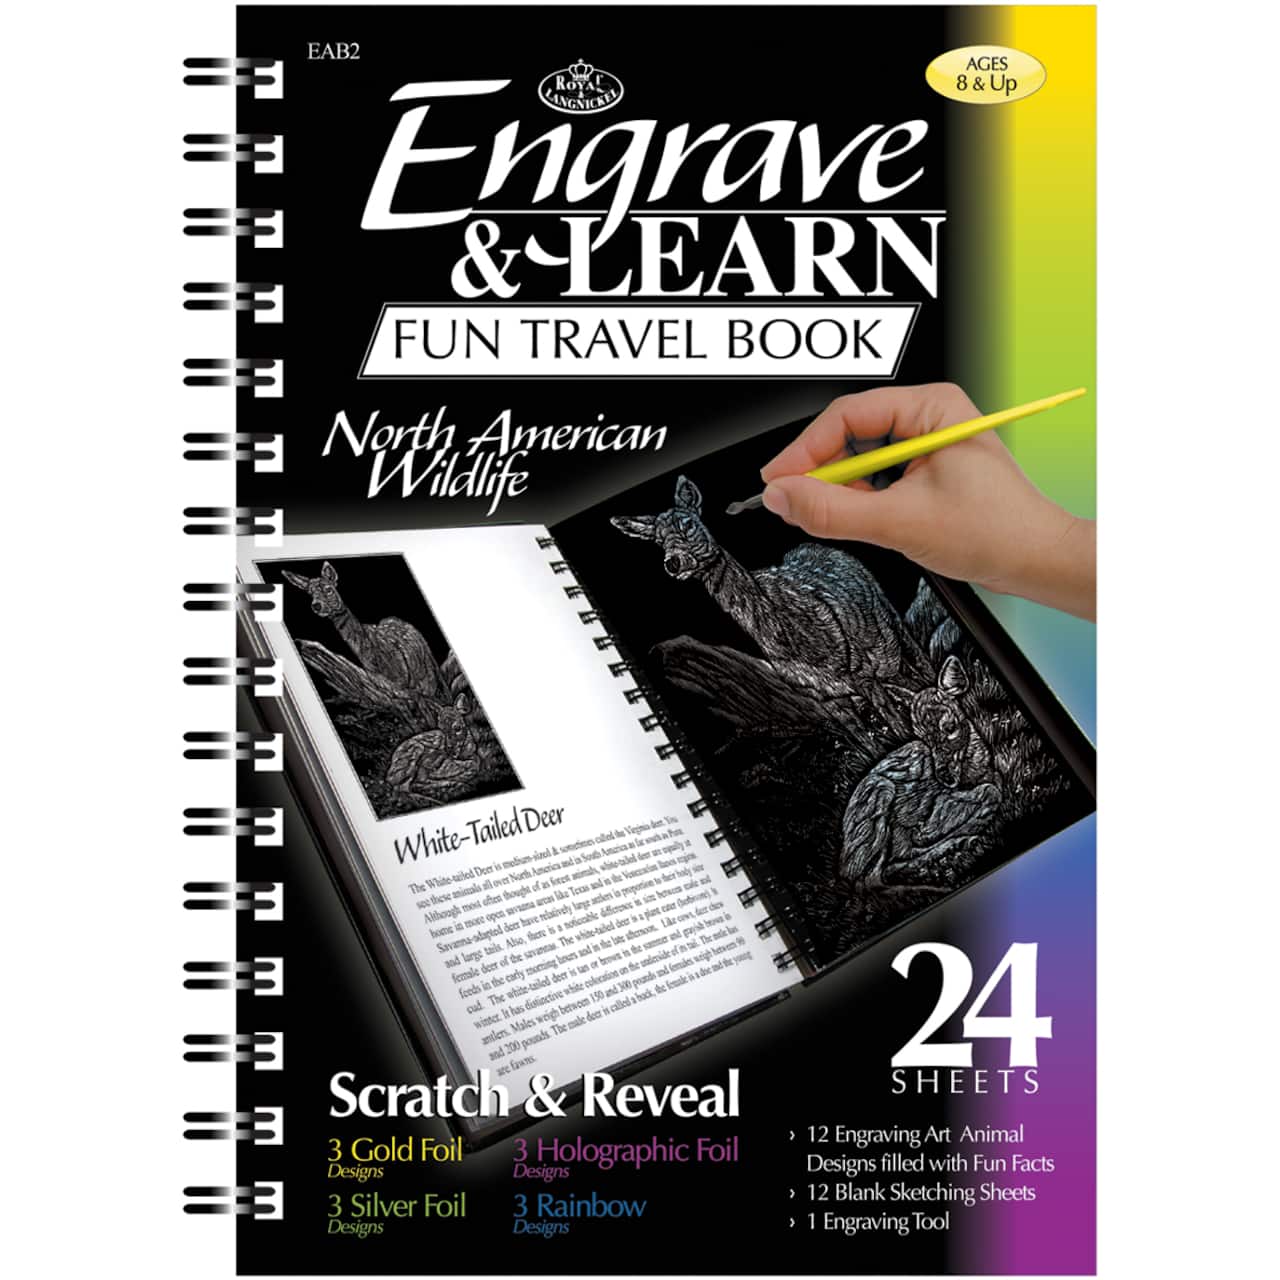 Engrave & Learn North American Wildlife Travel Book